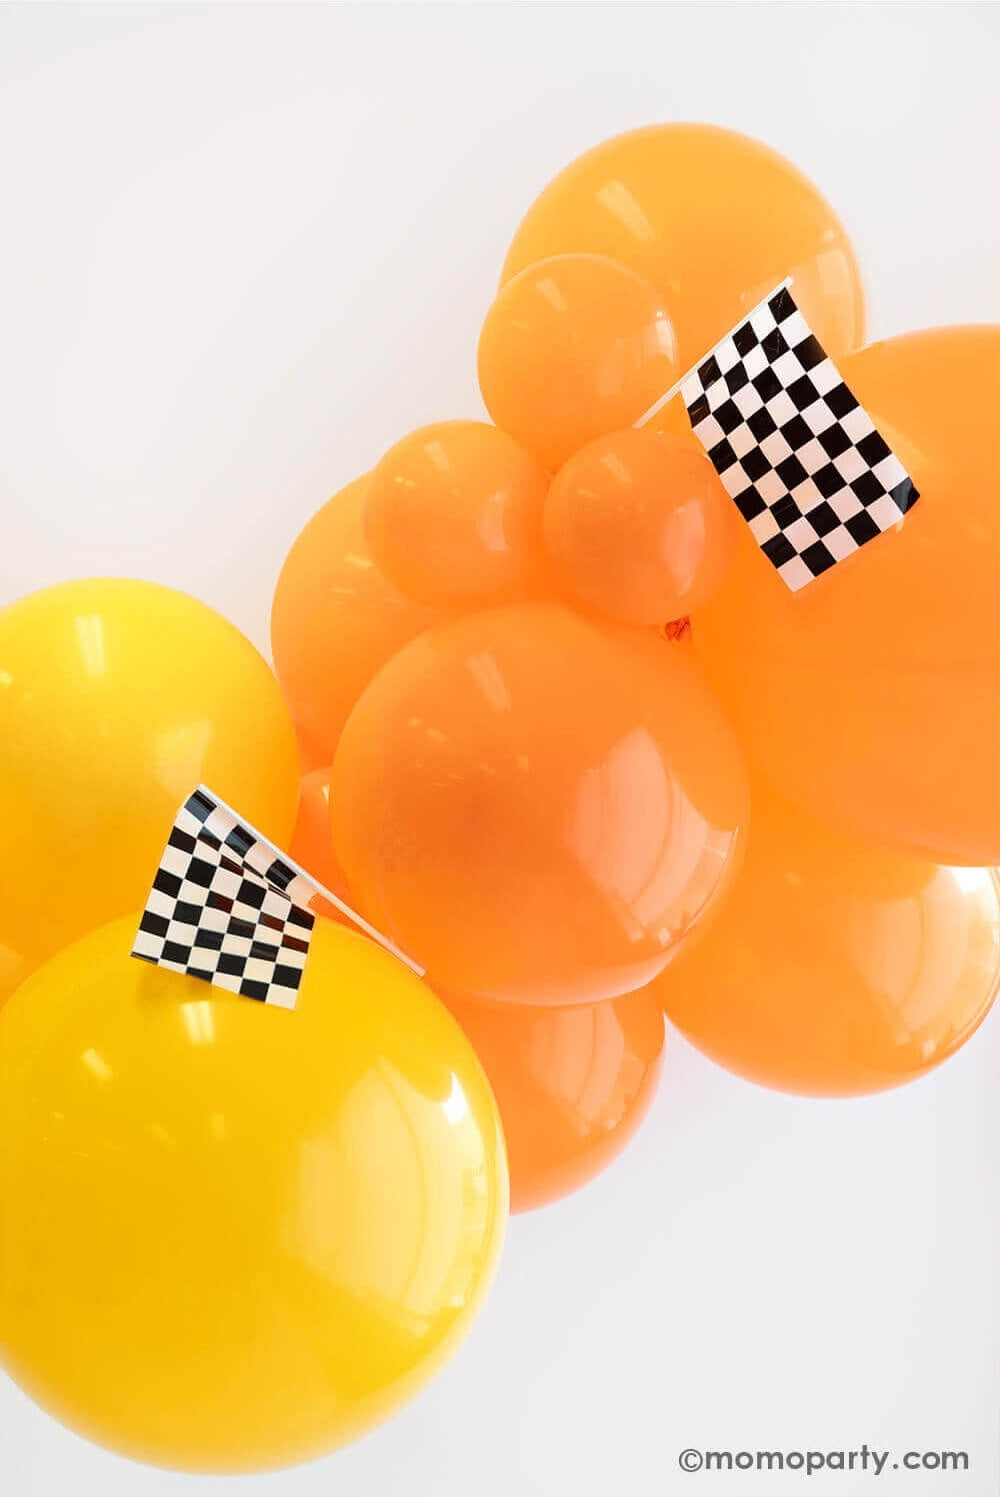 Momo Party's Hot Wheels themed balloon garland with checkered flags for kid's race car themed birthday party.